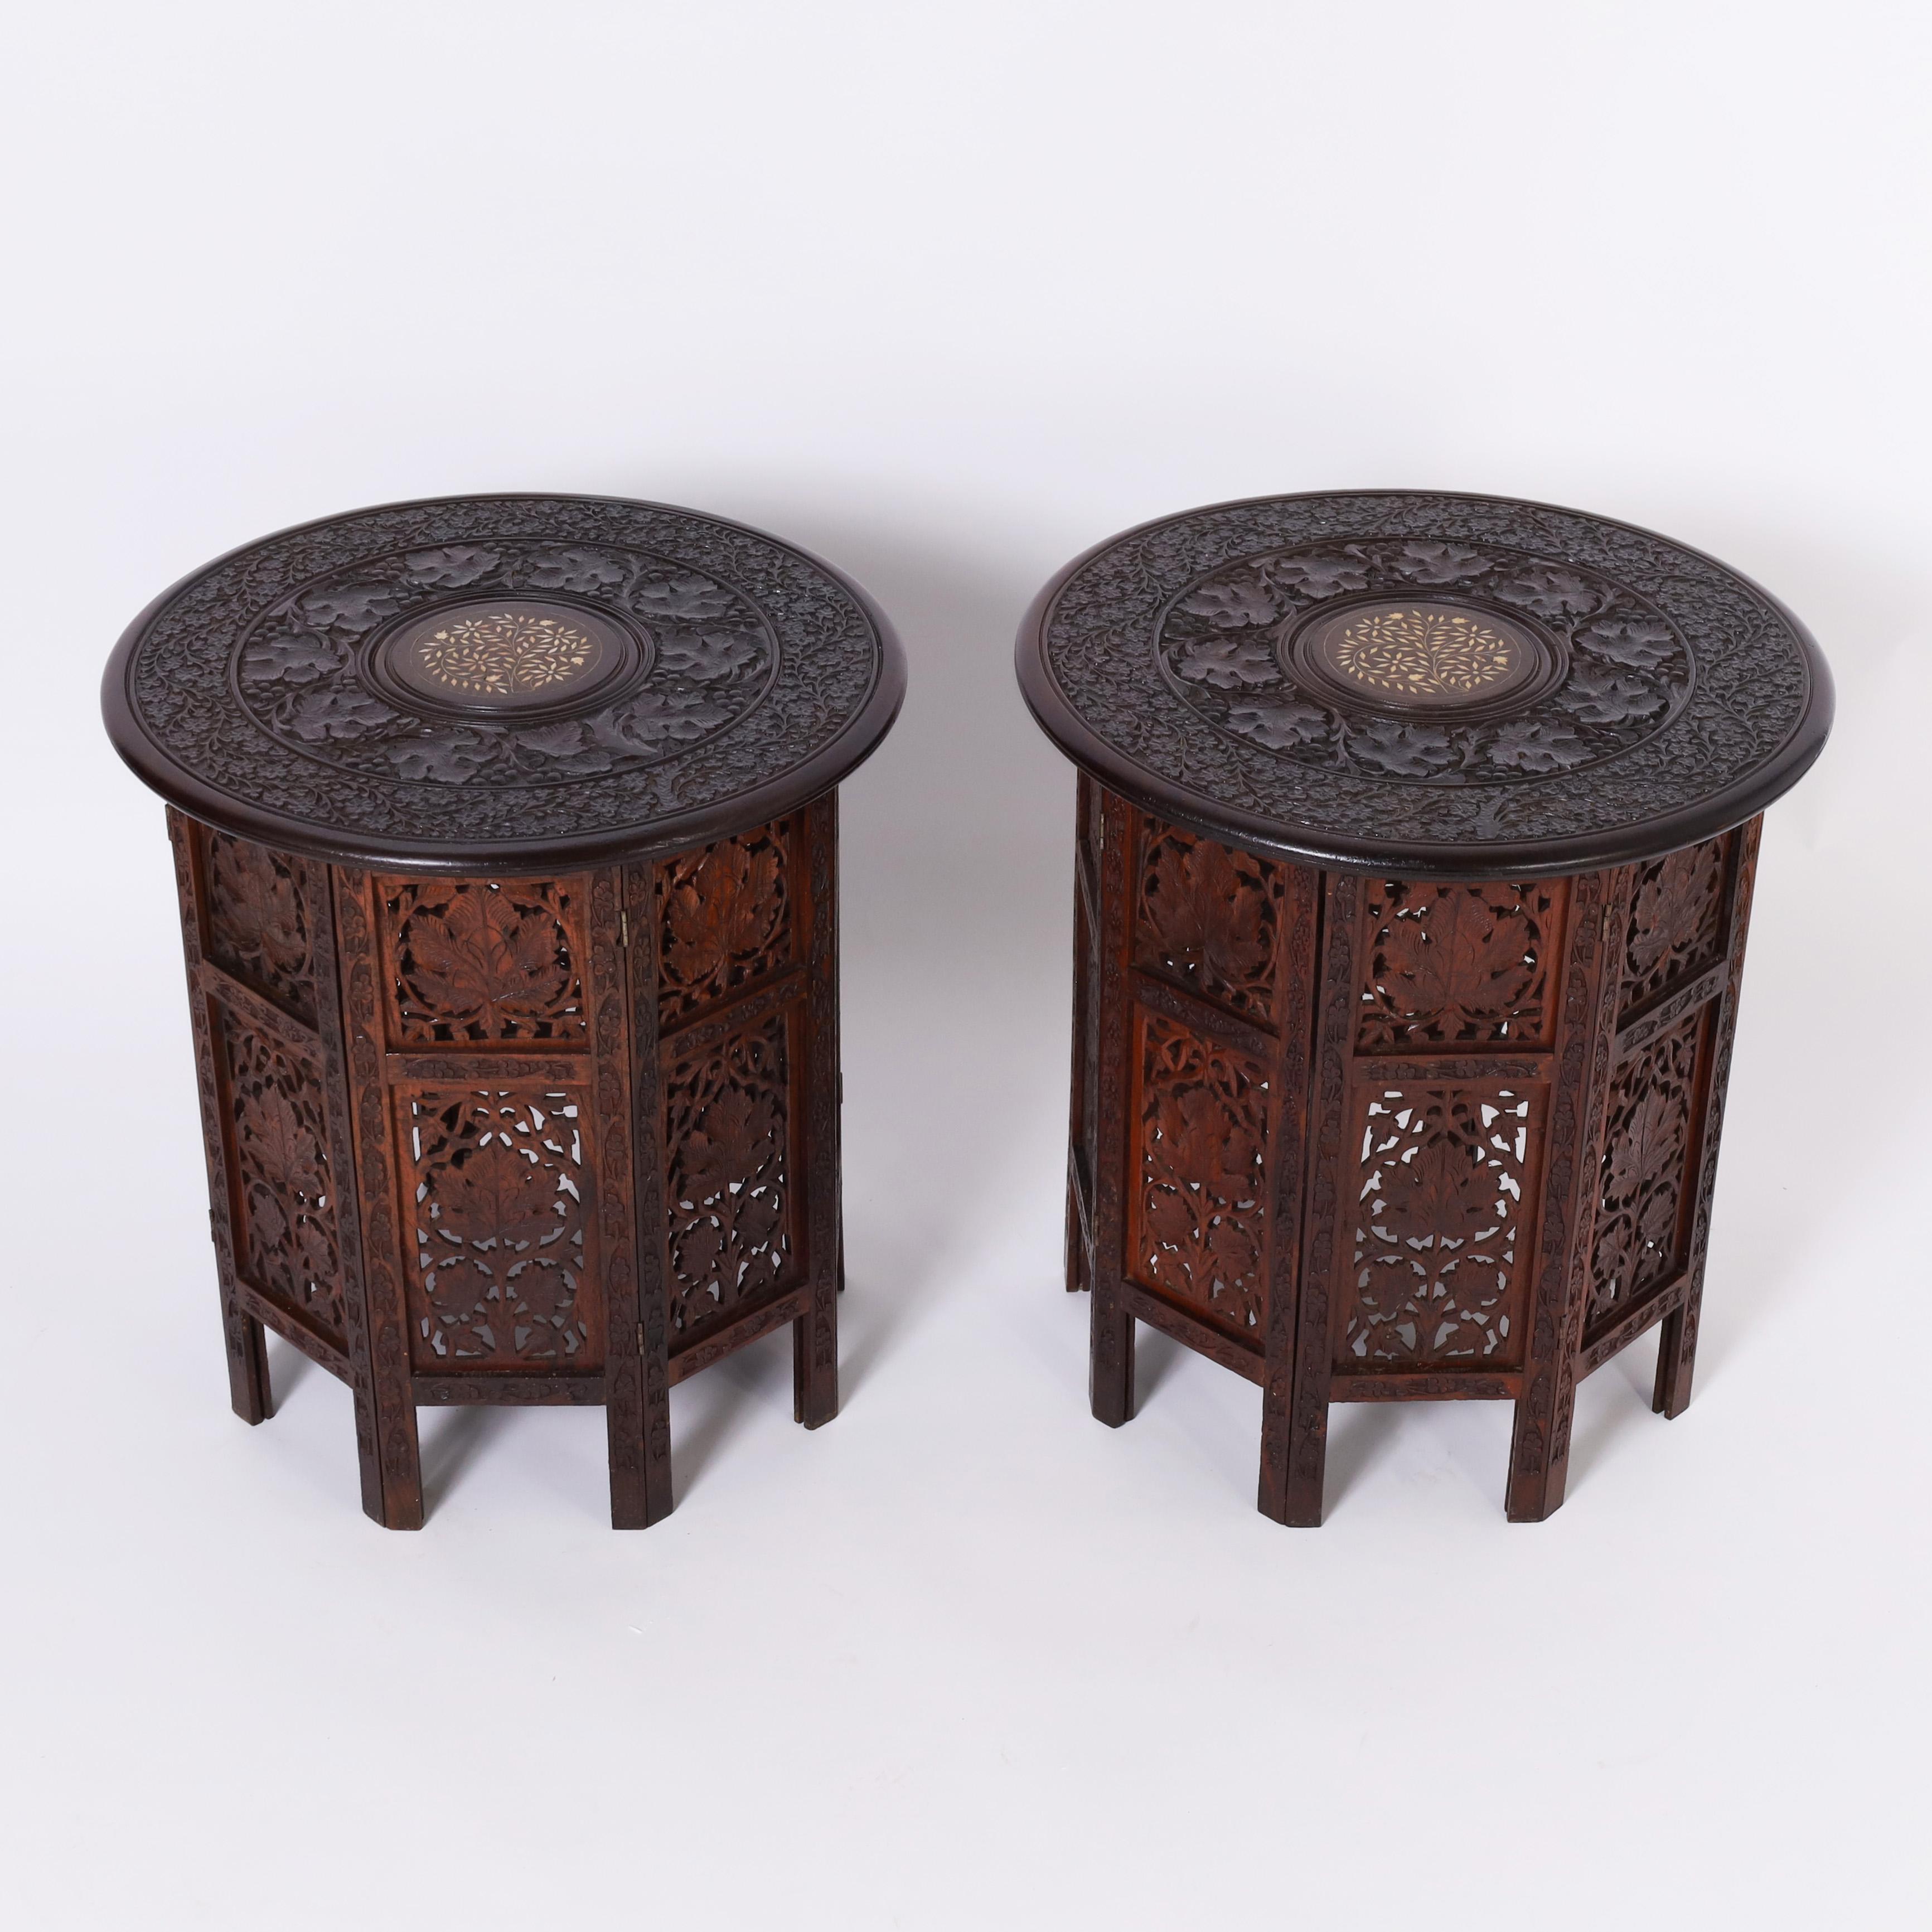 Impressive pair of British colonial stands handcrafted in mahogany having round tops elaborately carved with floral motifs and a center medallion with inlaid bone flowers. The octagon bases are floral carved with open fretwork. 